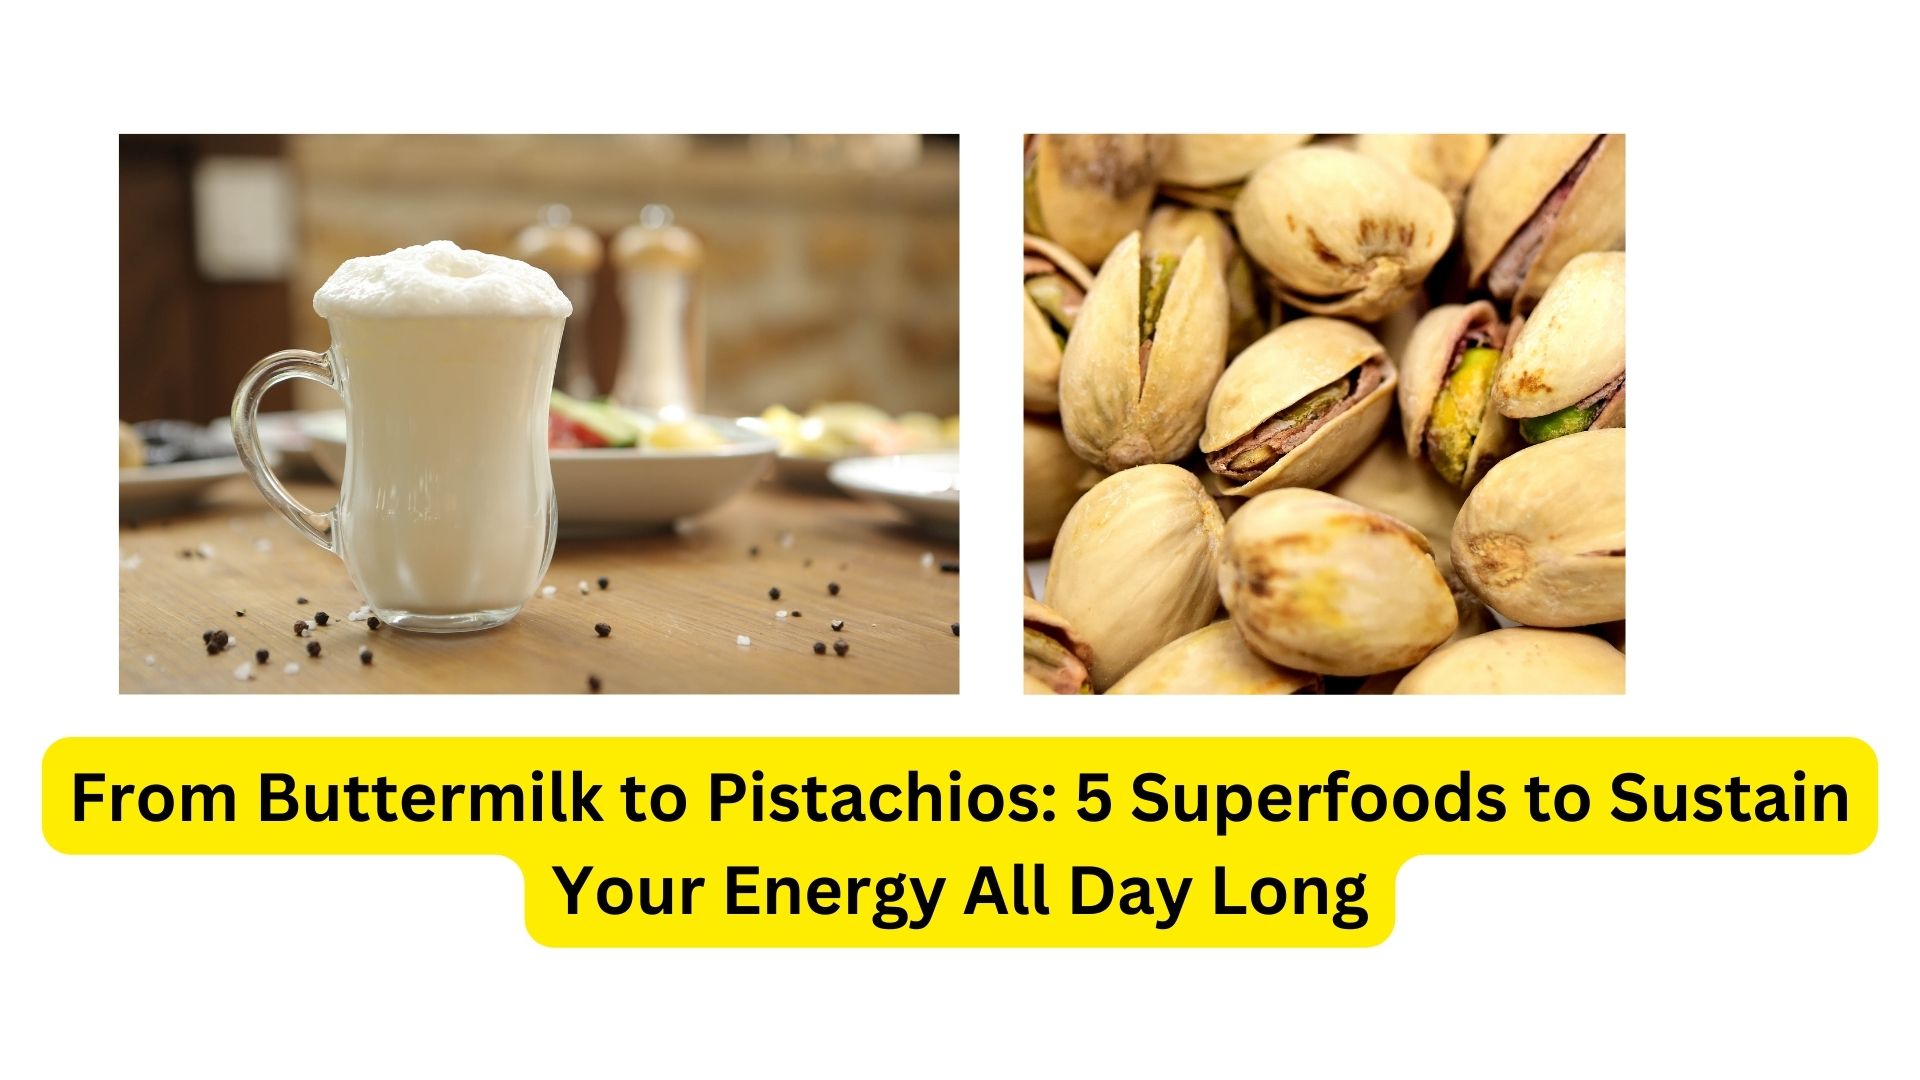 From Buttermilk to Pistachios: 5 Superfoods to Sustain Your Energy All Day Long